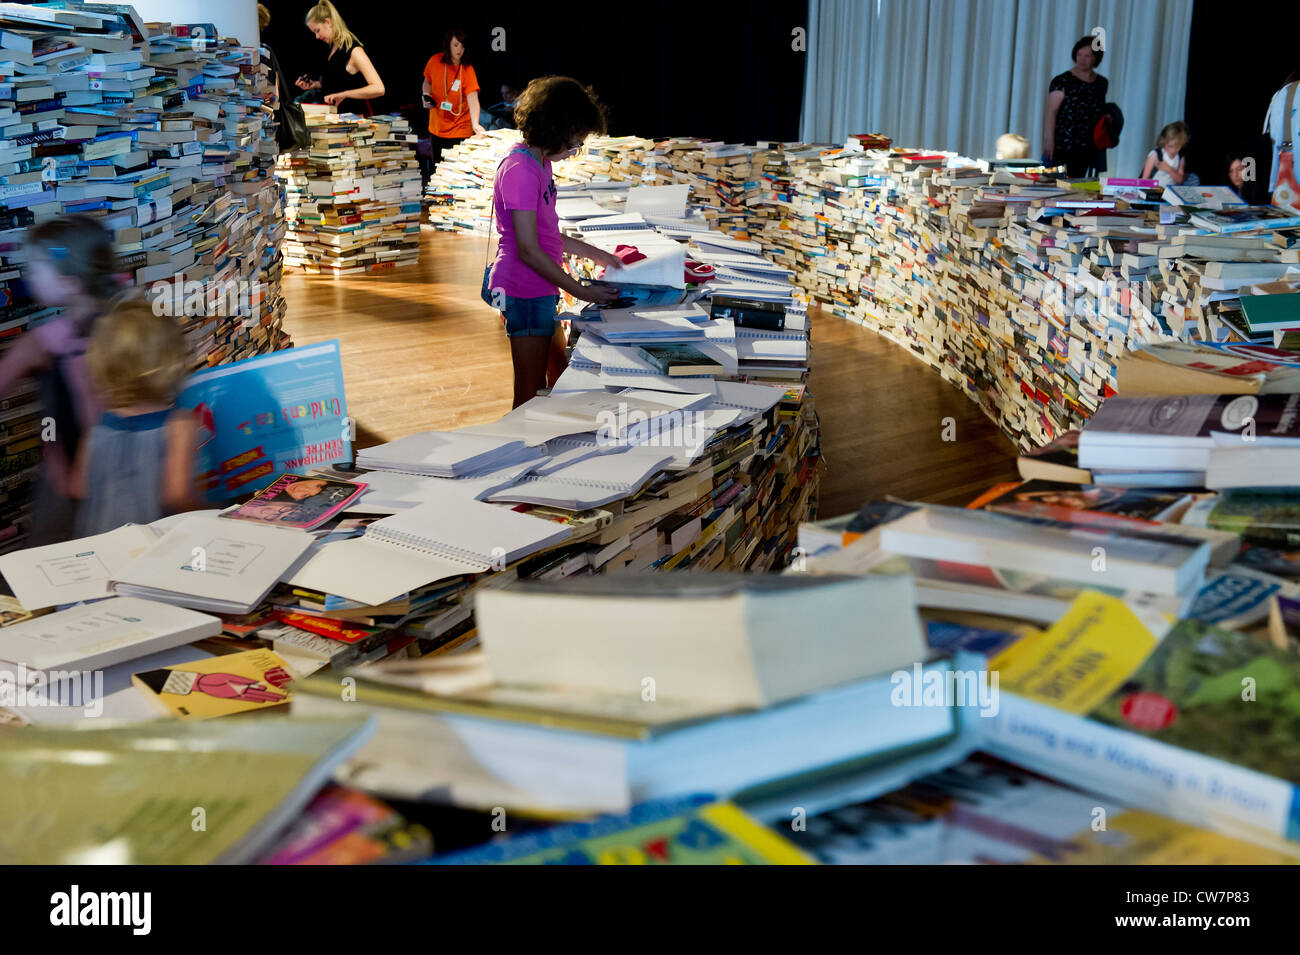 Created by Marcos Saboya and Gualter Pupo, aMAZEme immerses the audience in a labyrinth of books. Stock Photo